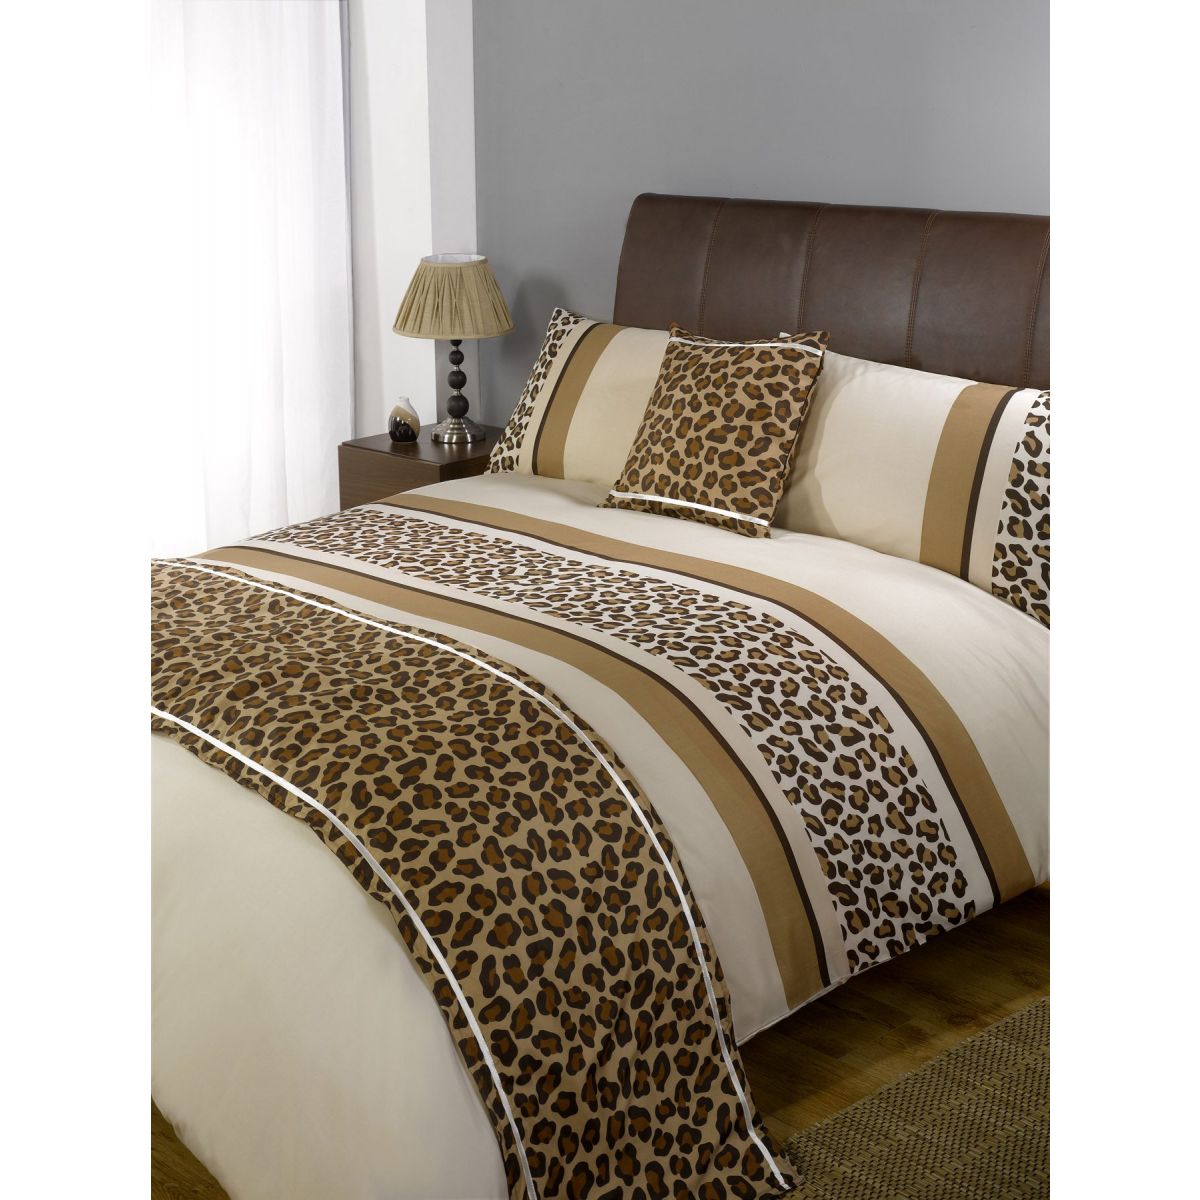 Leopard Bed In A Bag King Size Duvet Cover Set - Chocolate